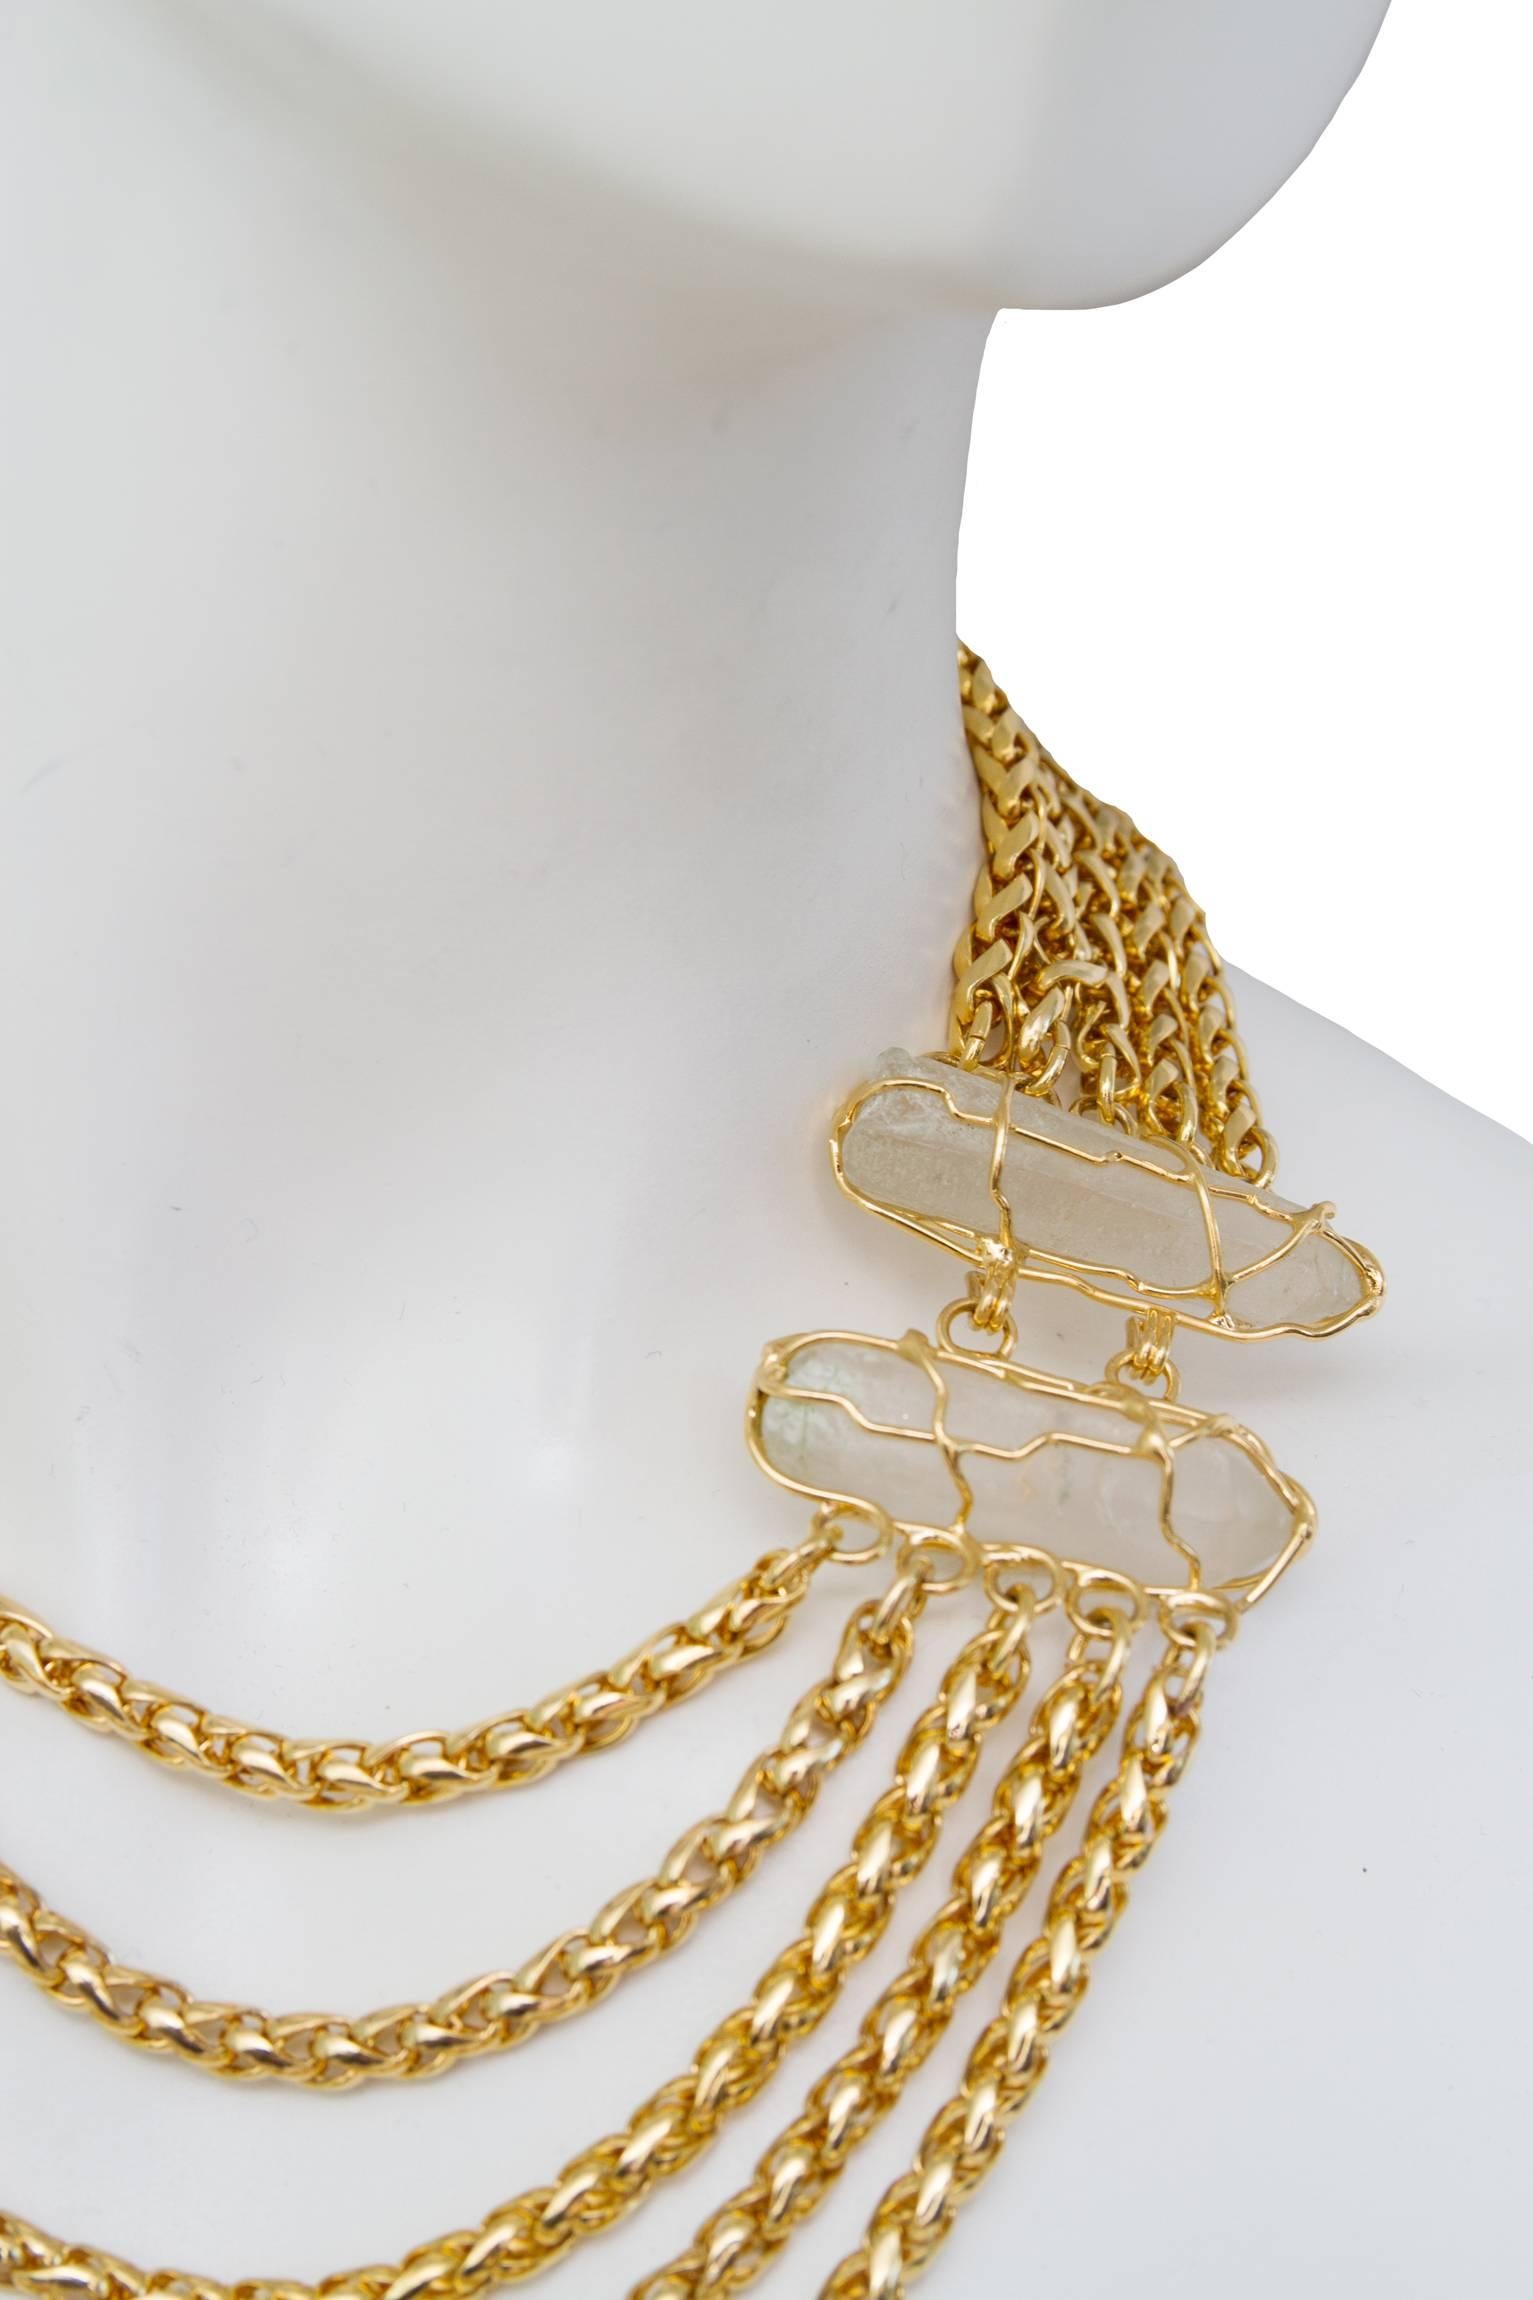 A stunning 1980s Yves Saint Laurent gold-toned chain necklace consisting of five individual strands in varying length. The Strands are attached at the back with a large clear-white raw crystal. The bullet shaped stone is encased in gold and extends